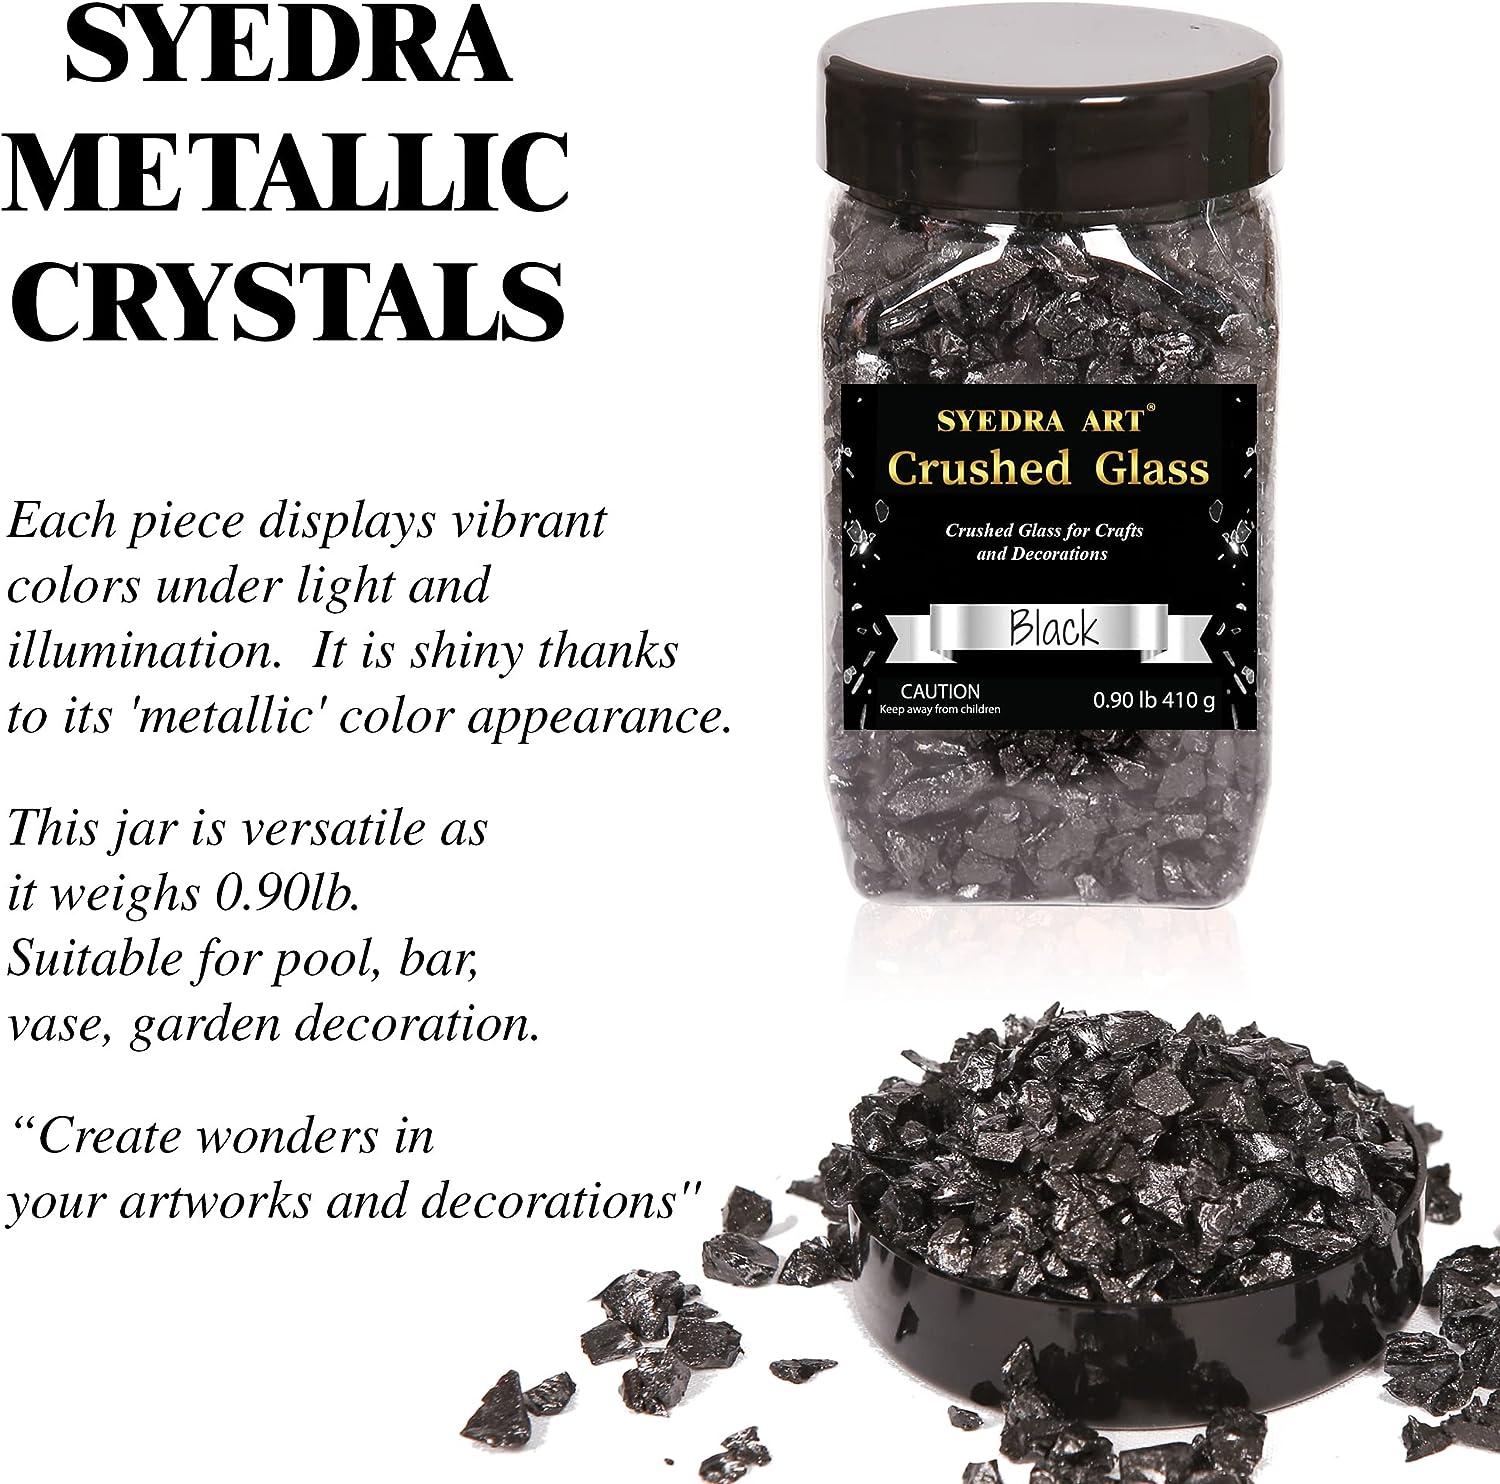 Syedra Crushed Glass for Crafts,Glitter Crushed High Luster Chips, Broken  Glass Pieces, 3-6mm, 410G (Black)